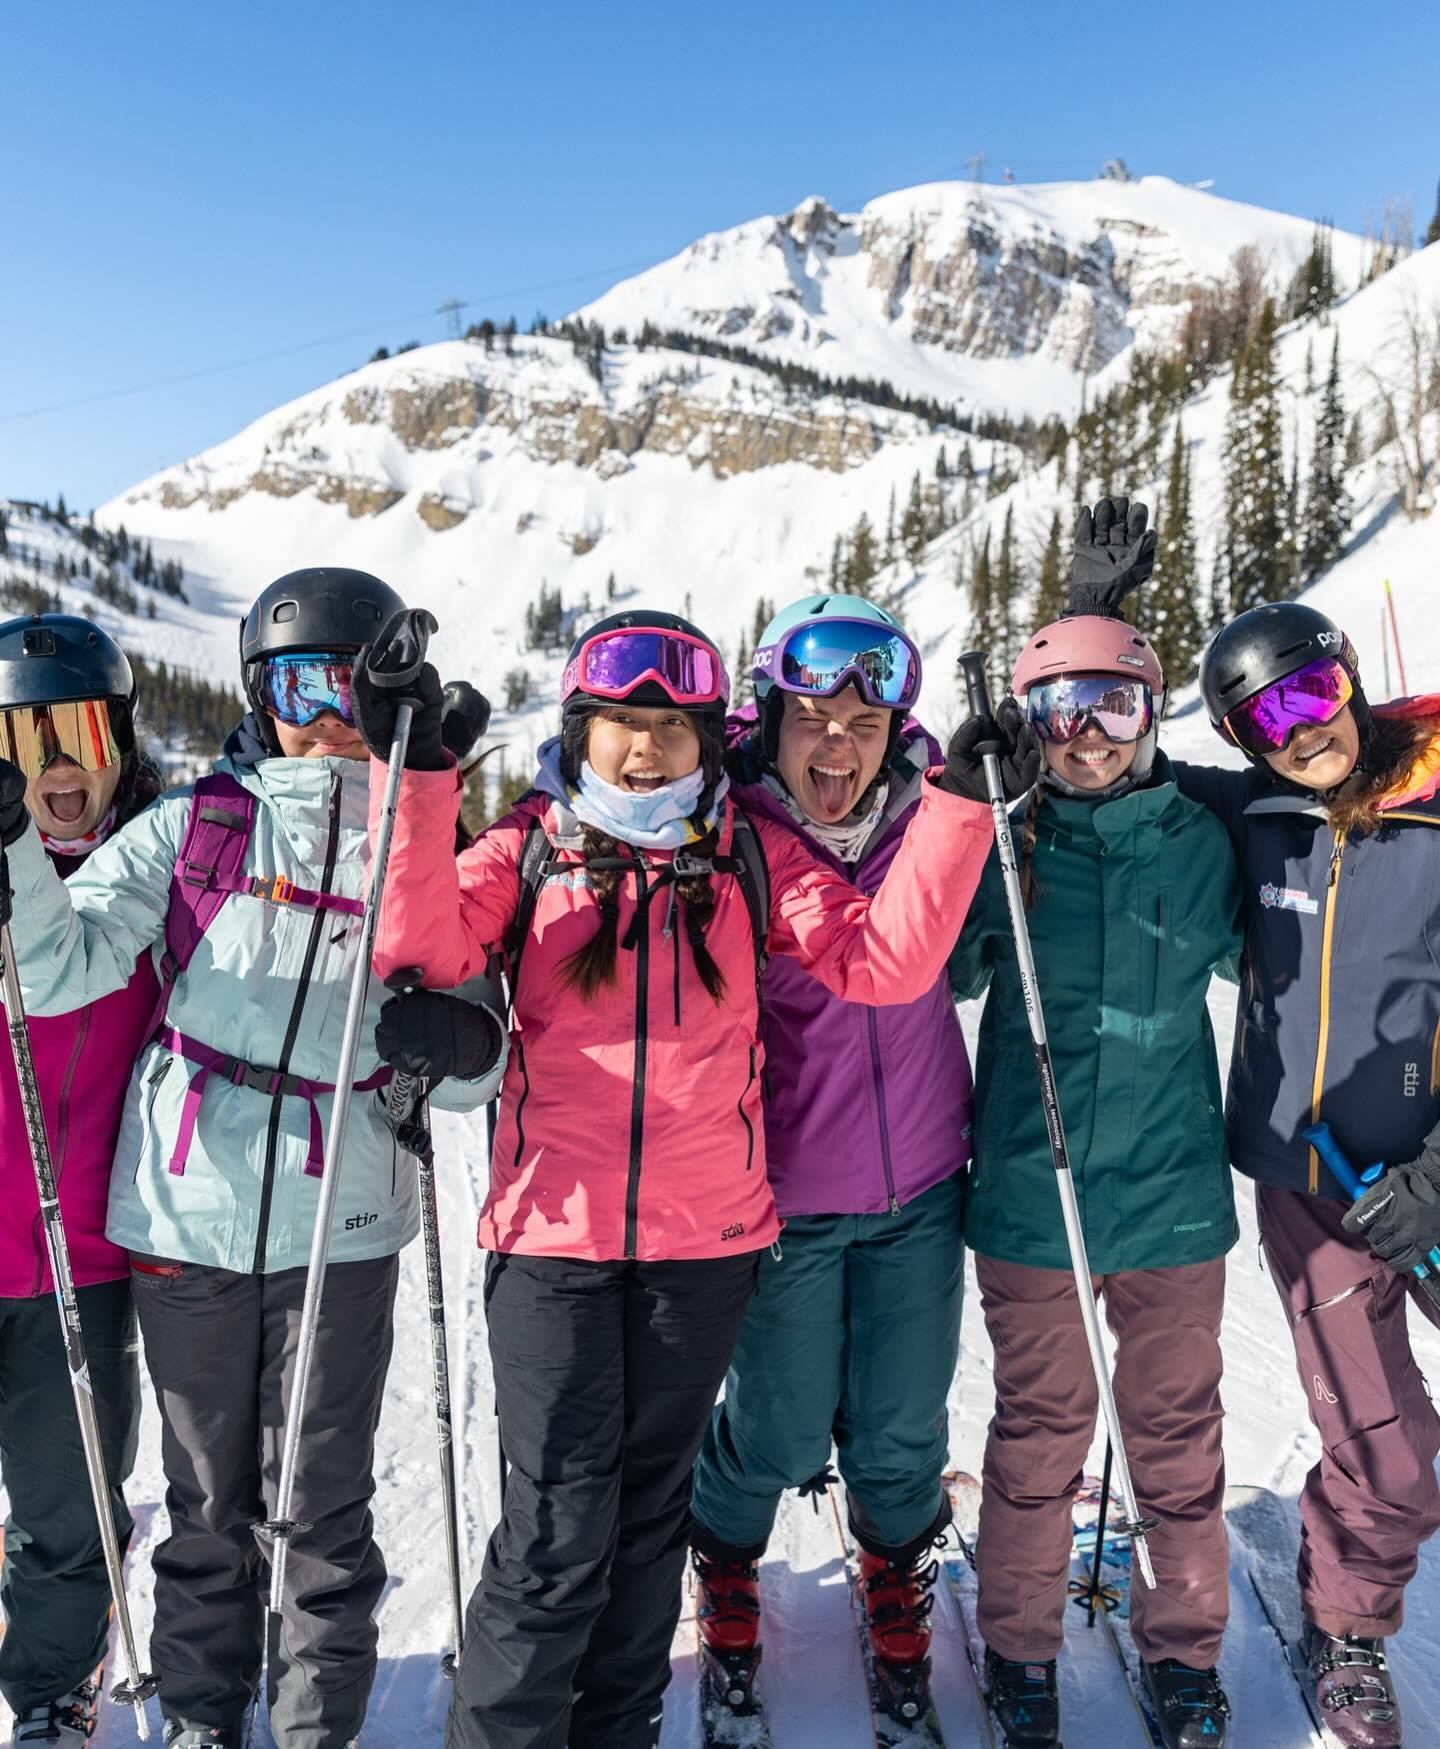 ski ya later! 

We had such a memorable ski/snowboard season with our Coombs Club participants! From skiing Sunnyside over at Snow King, learning to do small jumps, going on the Tram for the first time, they did it all with big smiles. Better yet, ea